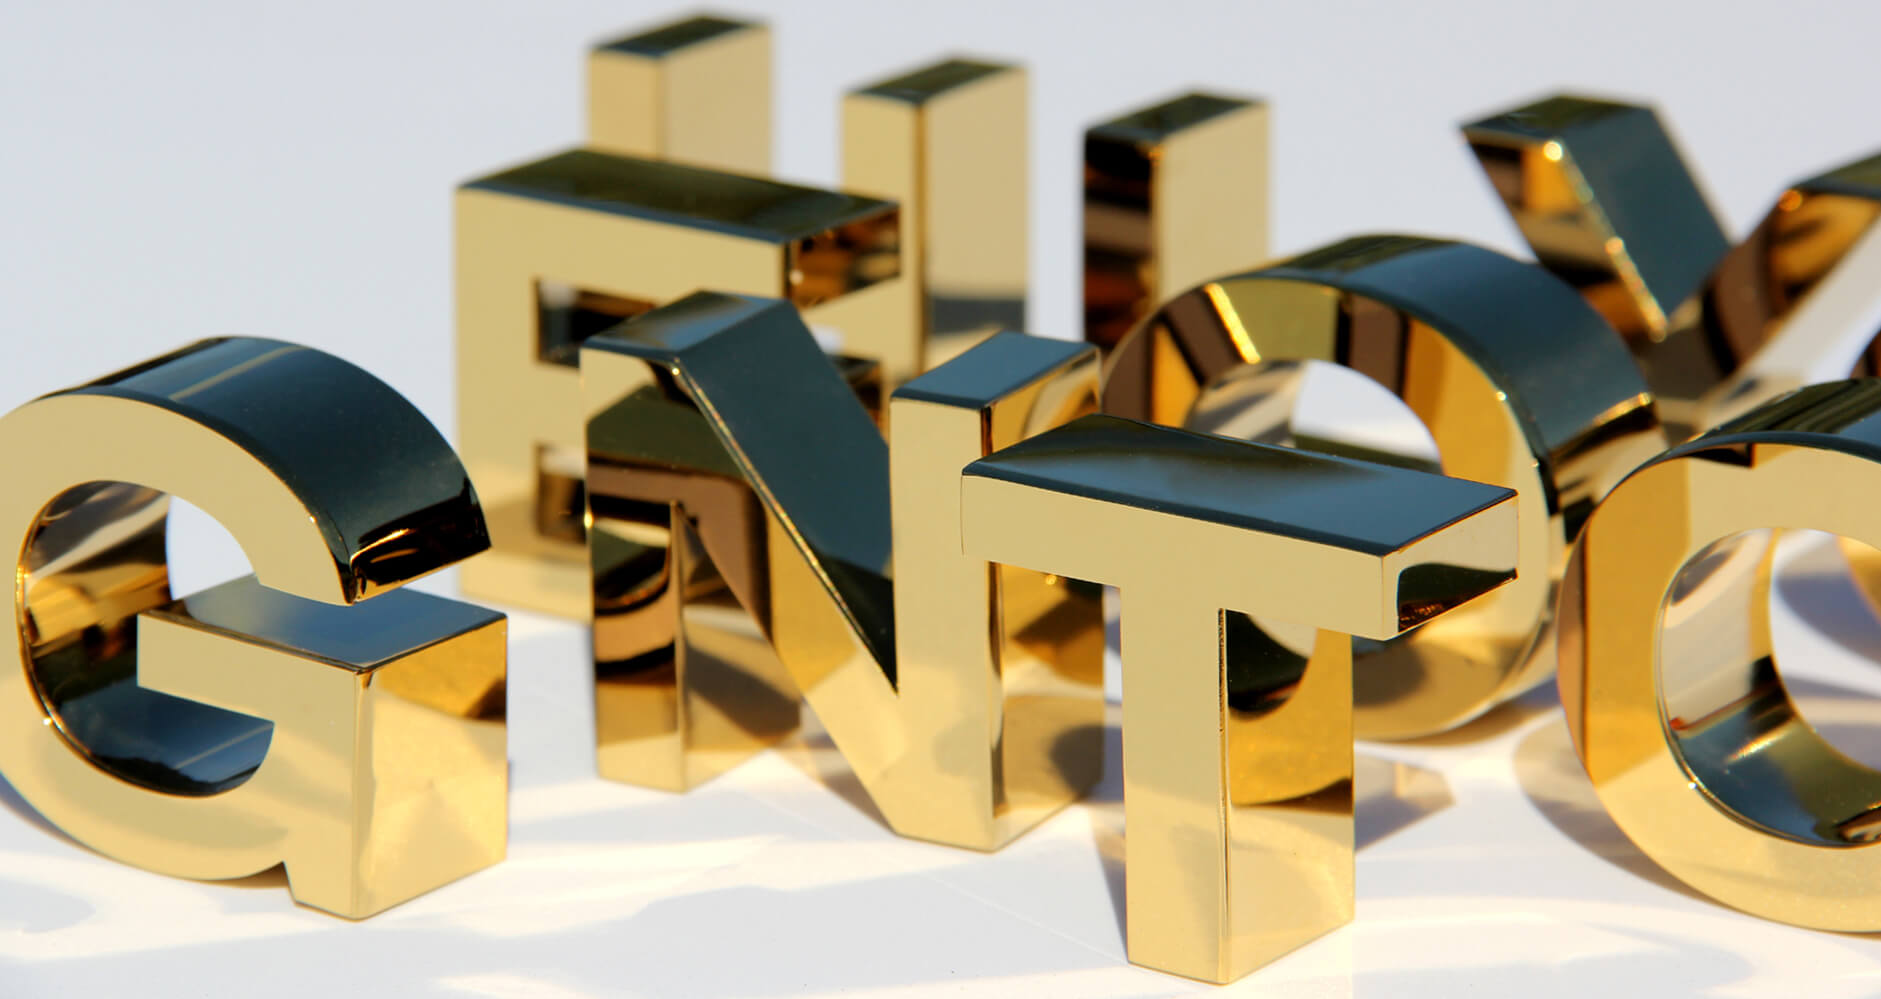 Small letters - made of stainless steel, polished, shiny